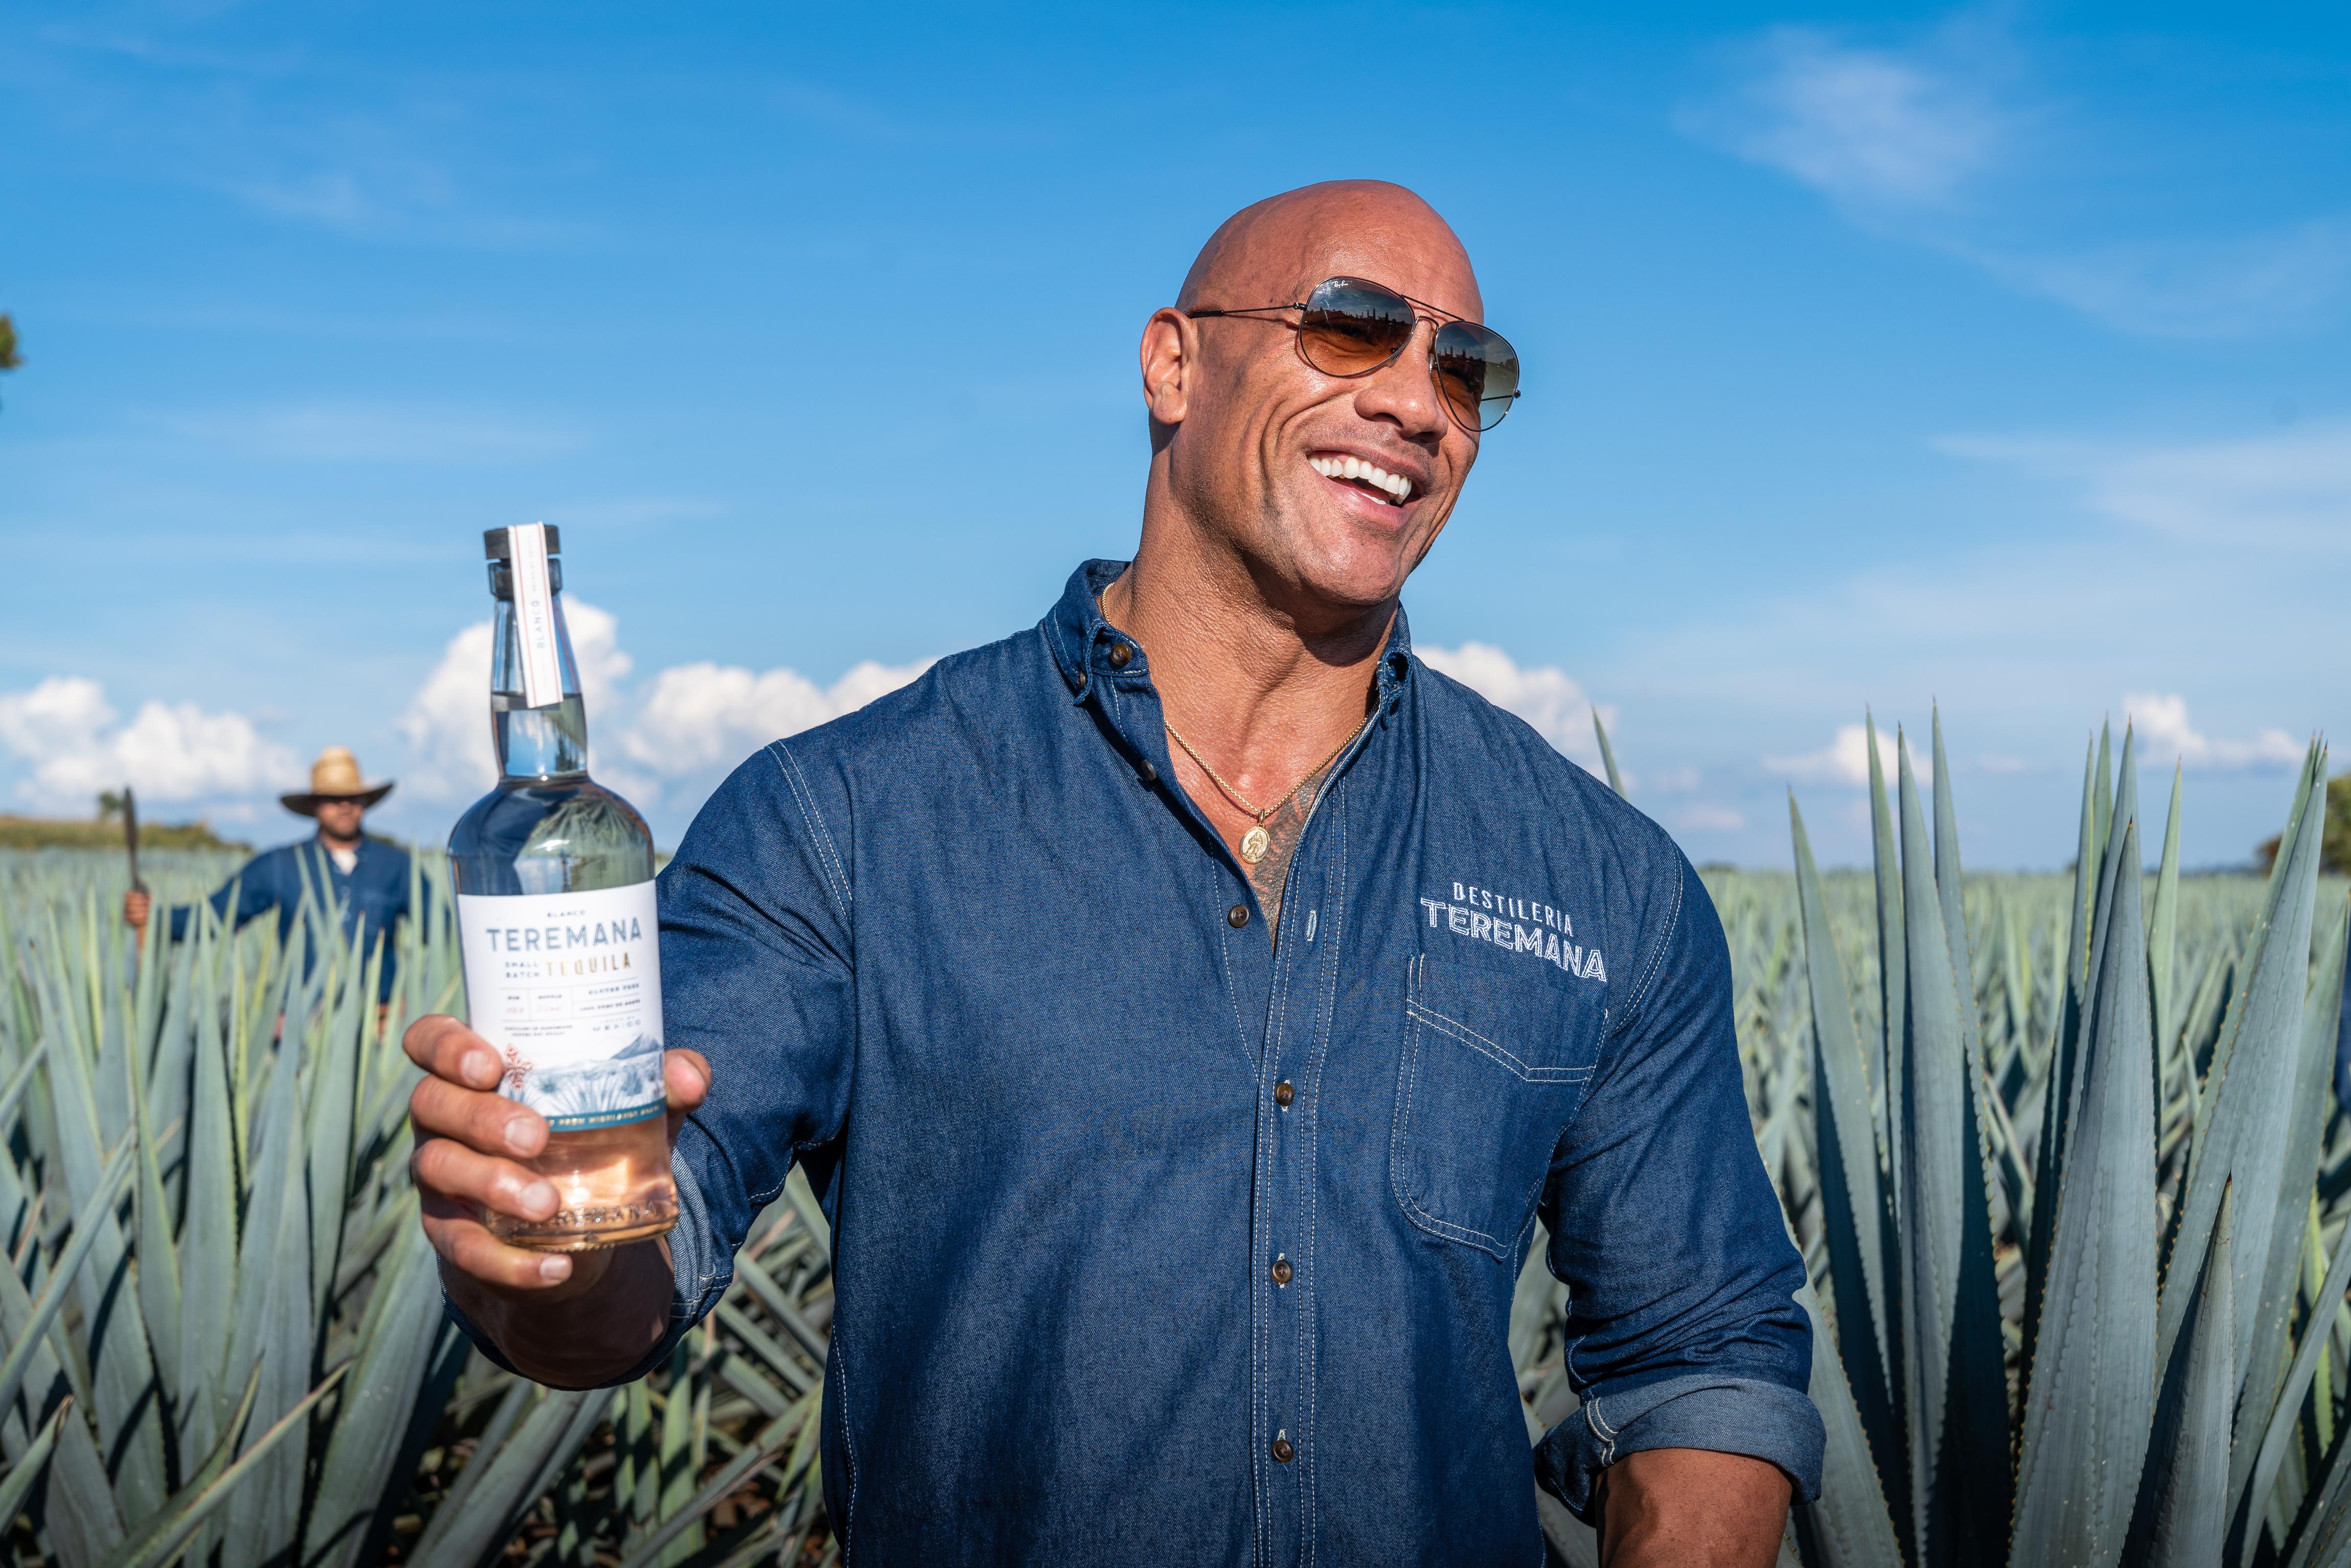 Dwayne 'The Rock' Johnson on tequila, lucha libre and his love of Mexico | Houston Style Magazine | Urban Weekly Newspaper Publication Website